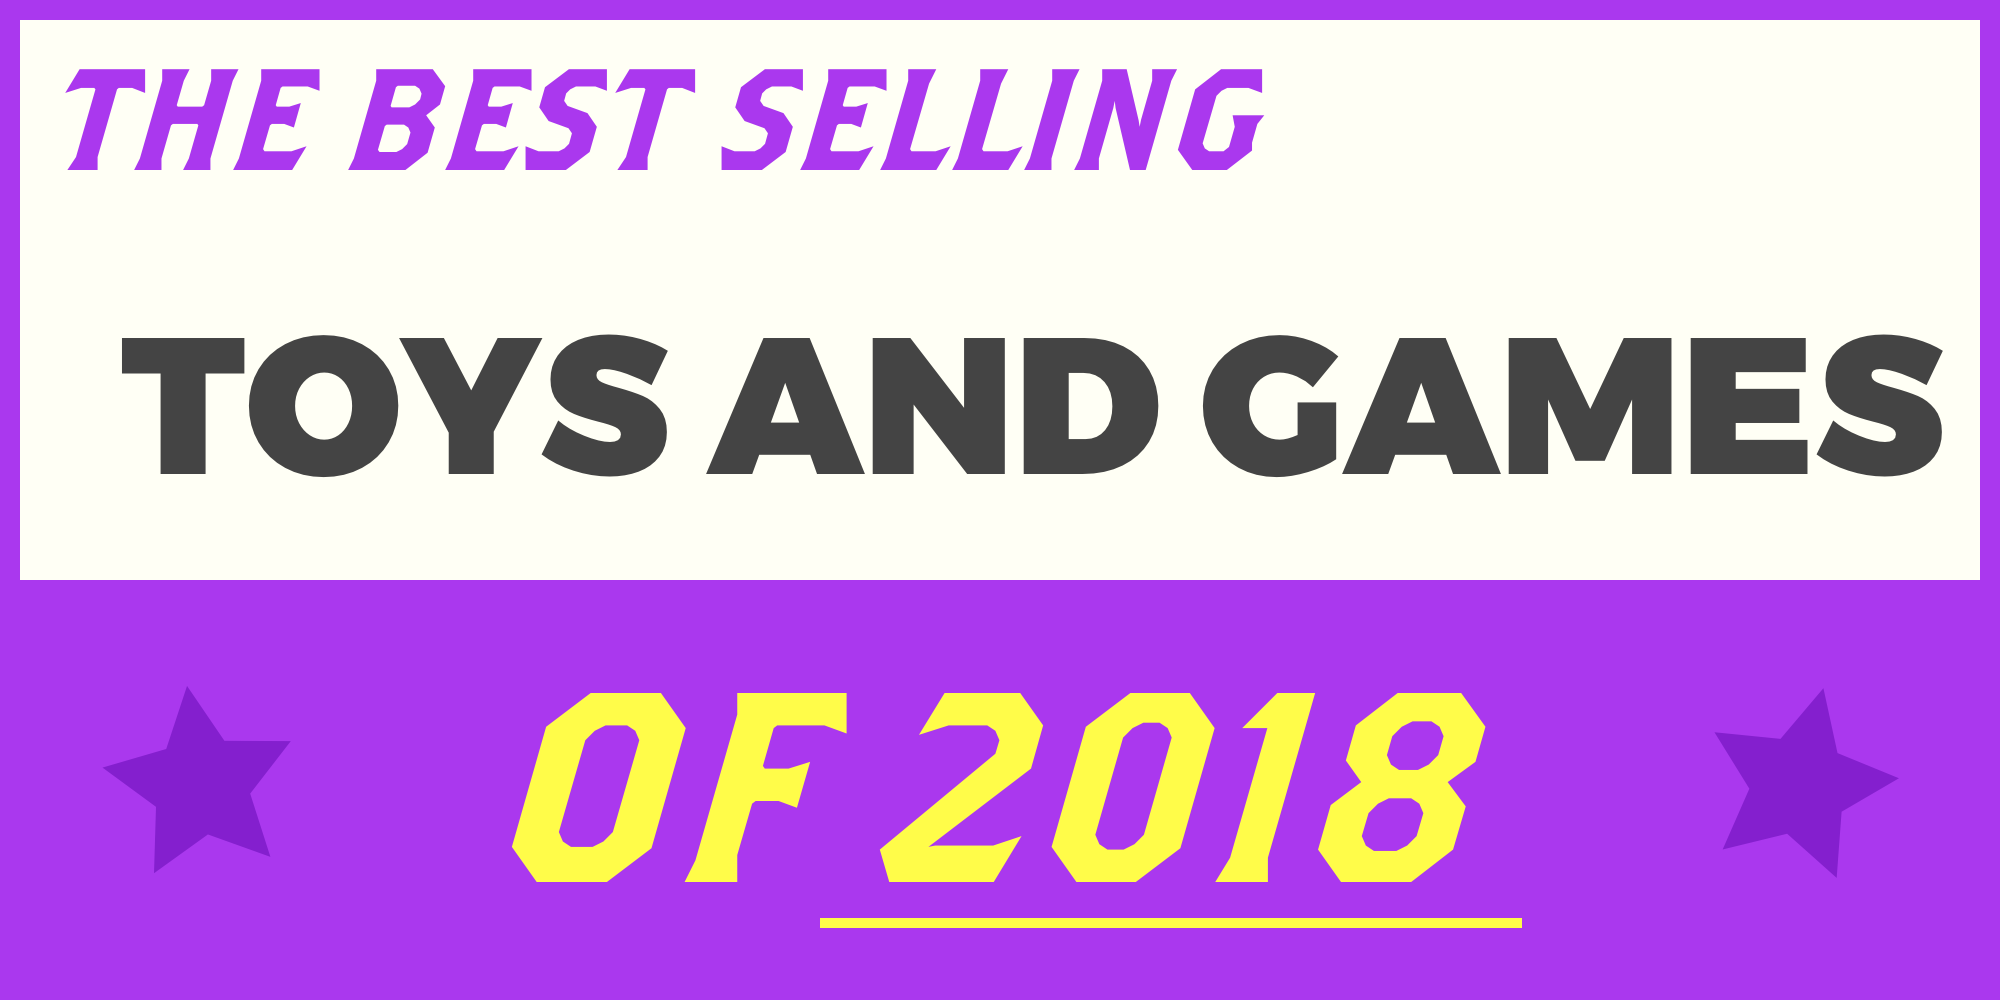 top selling toy 2018